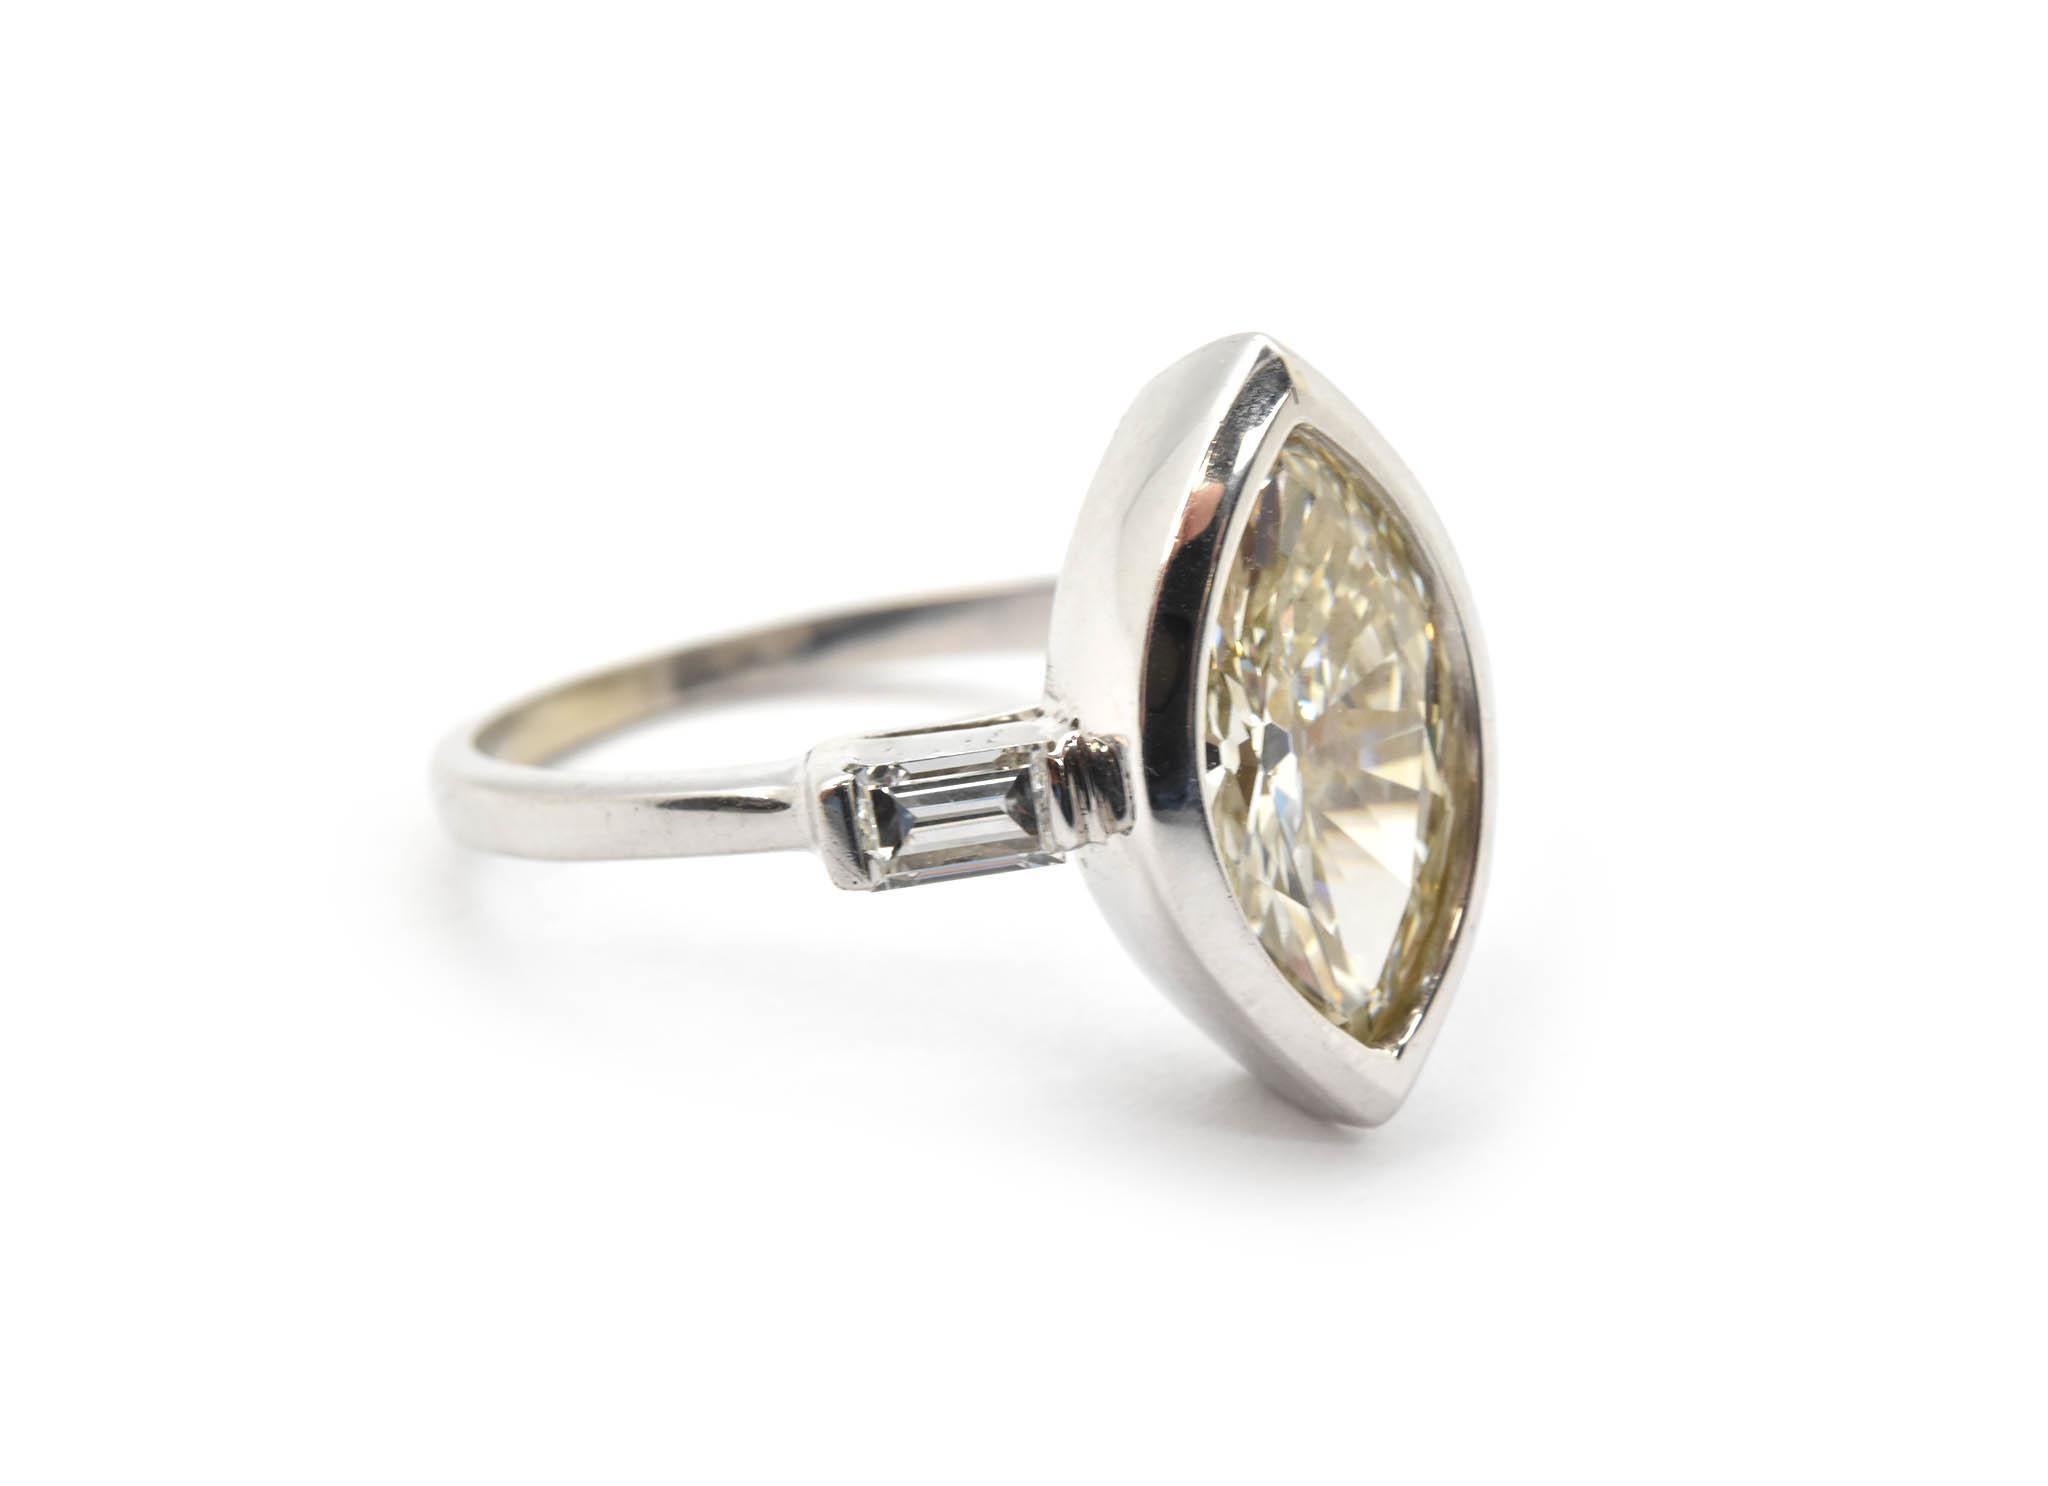 This ring is made in 14k white gold, and it holds a bezel-set 1.90ct marquise diamond. The stone is graded L in color and SI1 in clarity. The shank holds two baguette-cut accent diamonds for an additional weight of 0.24ct. The ring measures 15mm